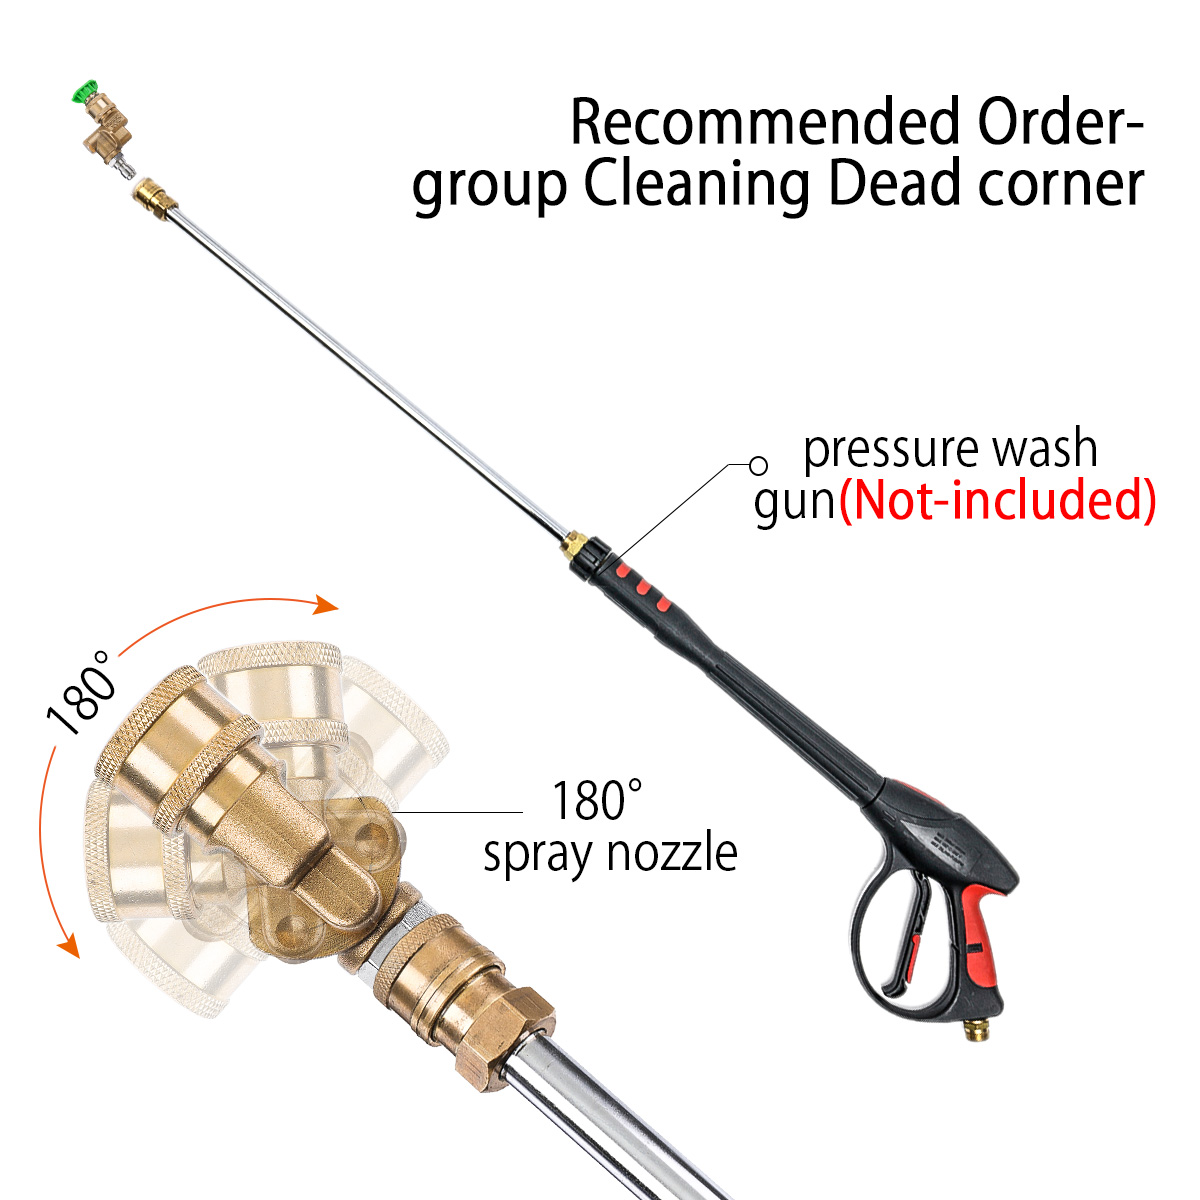 5Pcs-20-GPM-High-Pressure-Washer-Spray-Nozzle-Tips-with-Connector-14-Inch-Quick-connect-4500PSI-90de-1594773-3